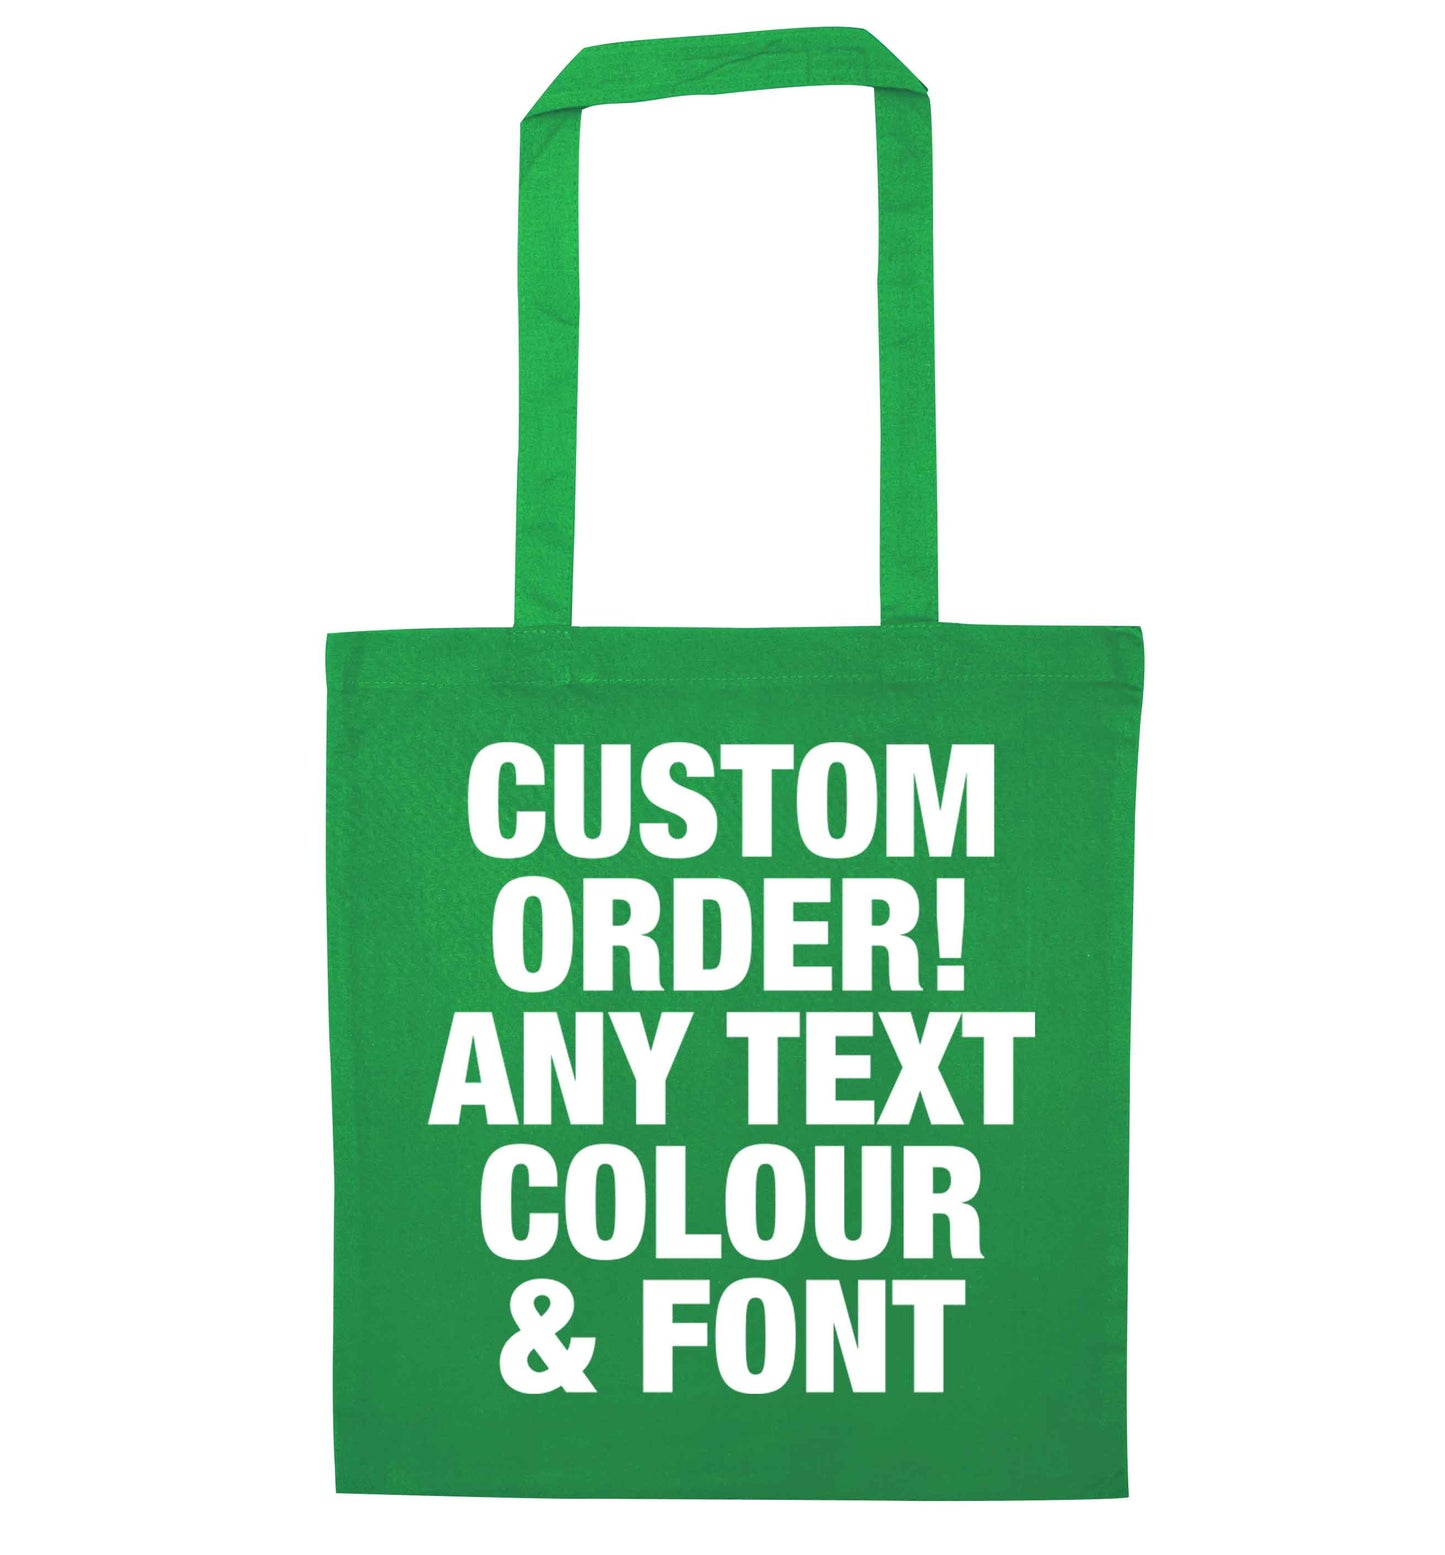 Custom order any text colour and font green tote bag